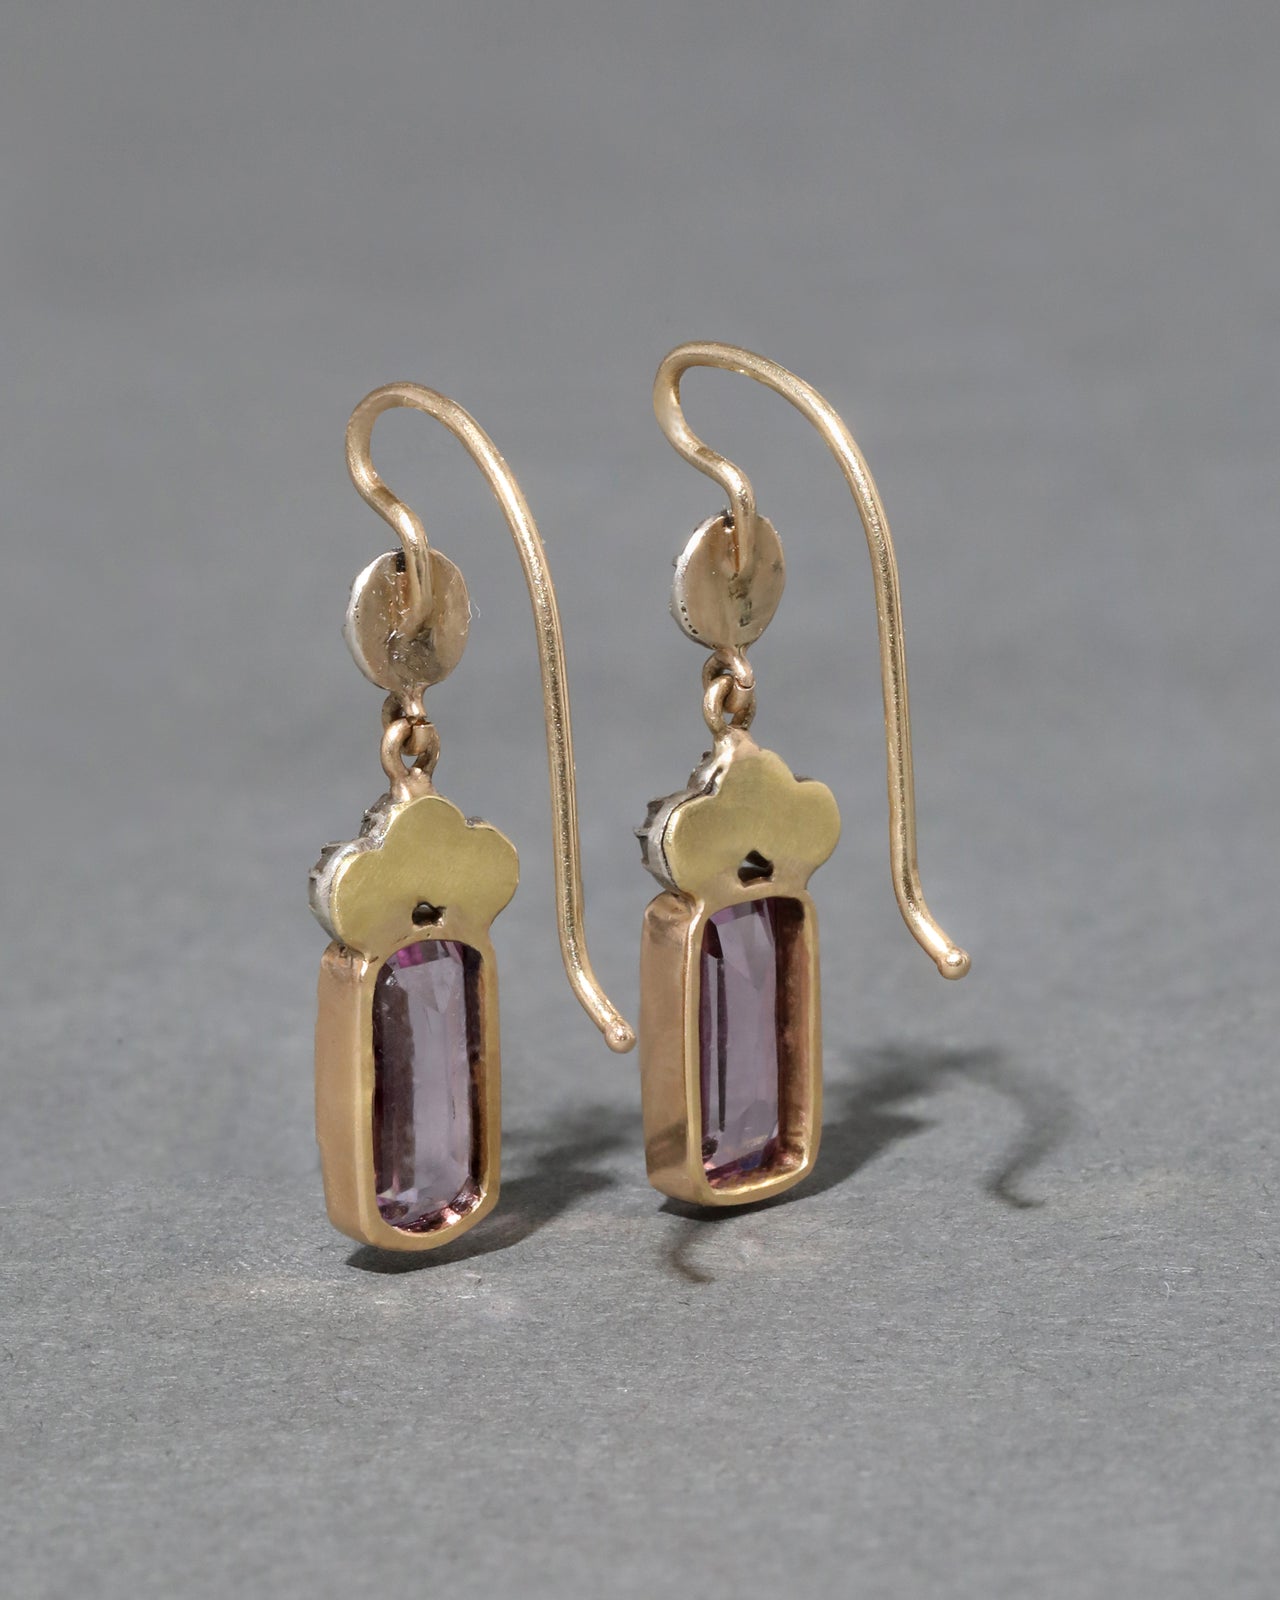 Antique Georgian Pink Topaz and Diamond Earrings in 14k Gold and Sterling Silver - Photo 2